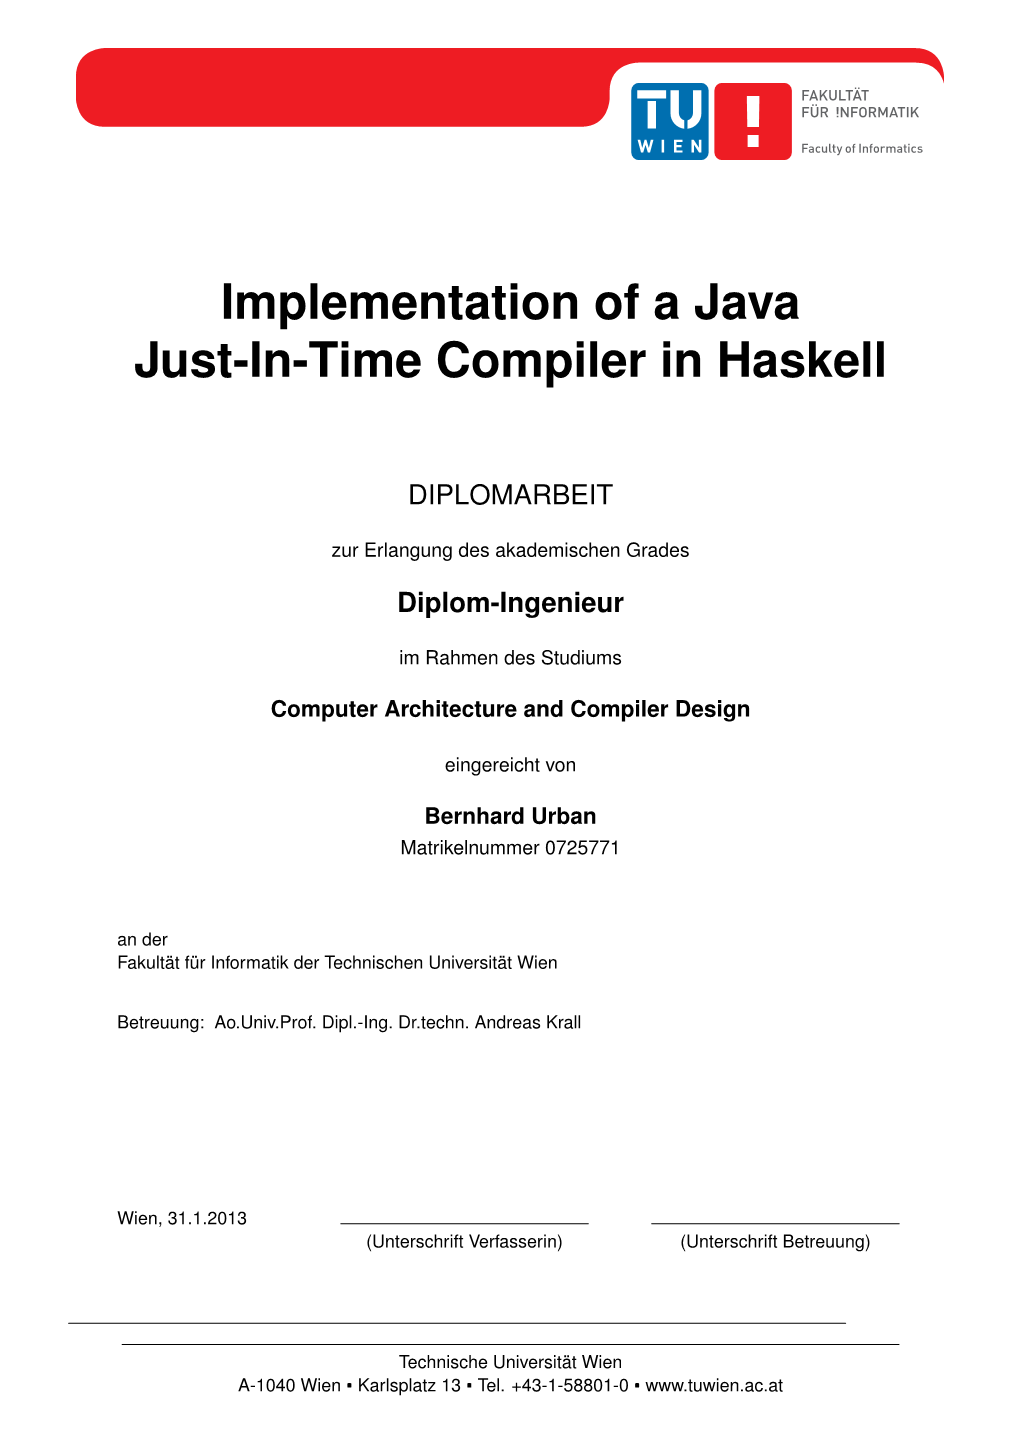 Implementation of a Java Just-In-Time Compiler in Haskell